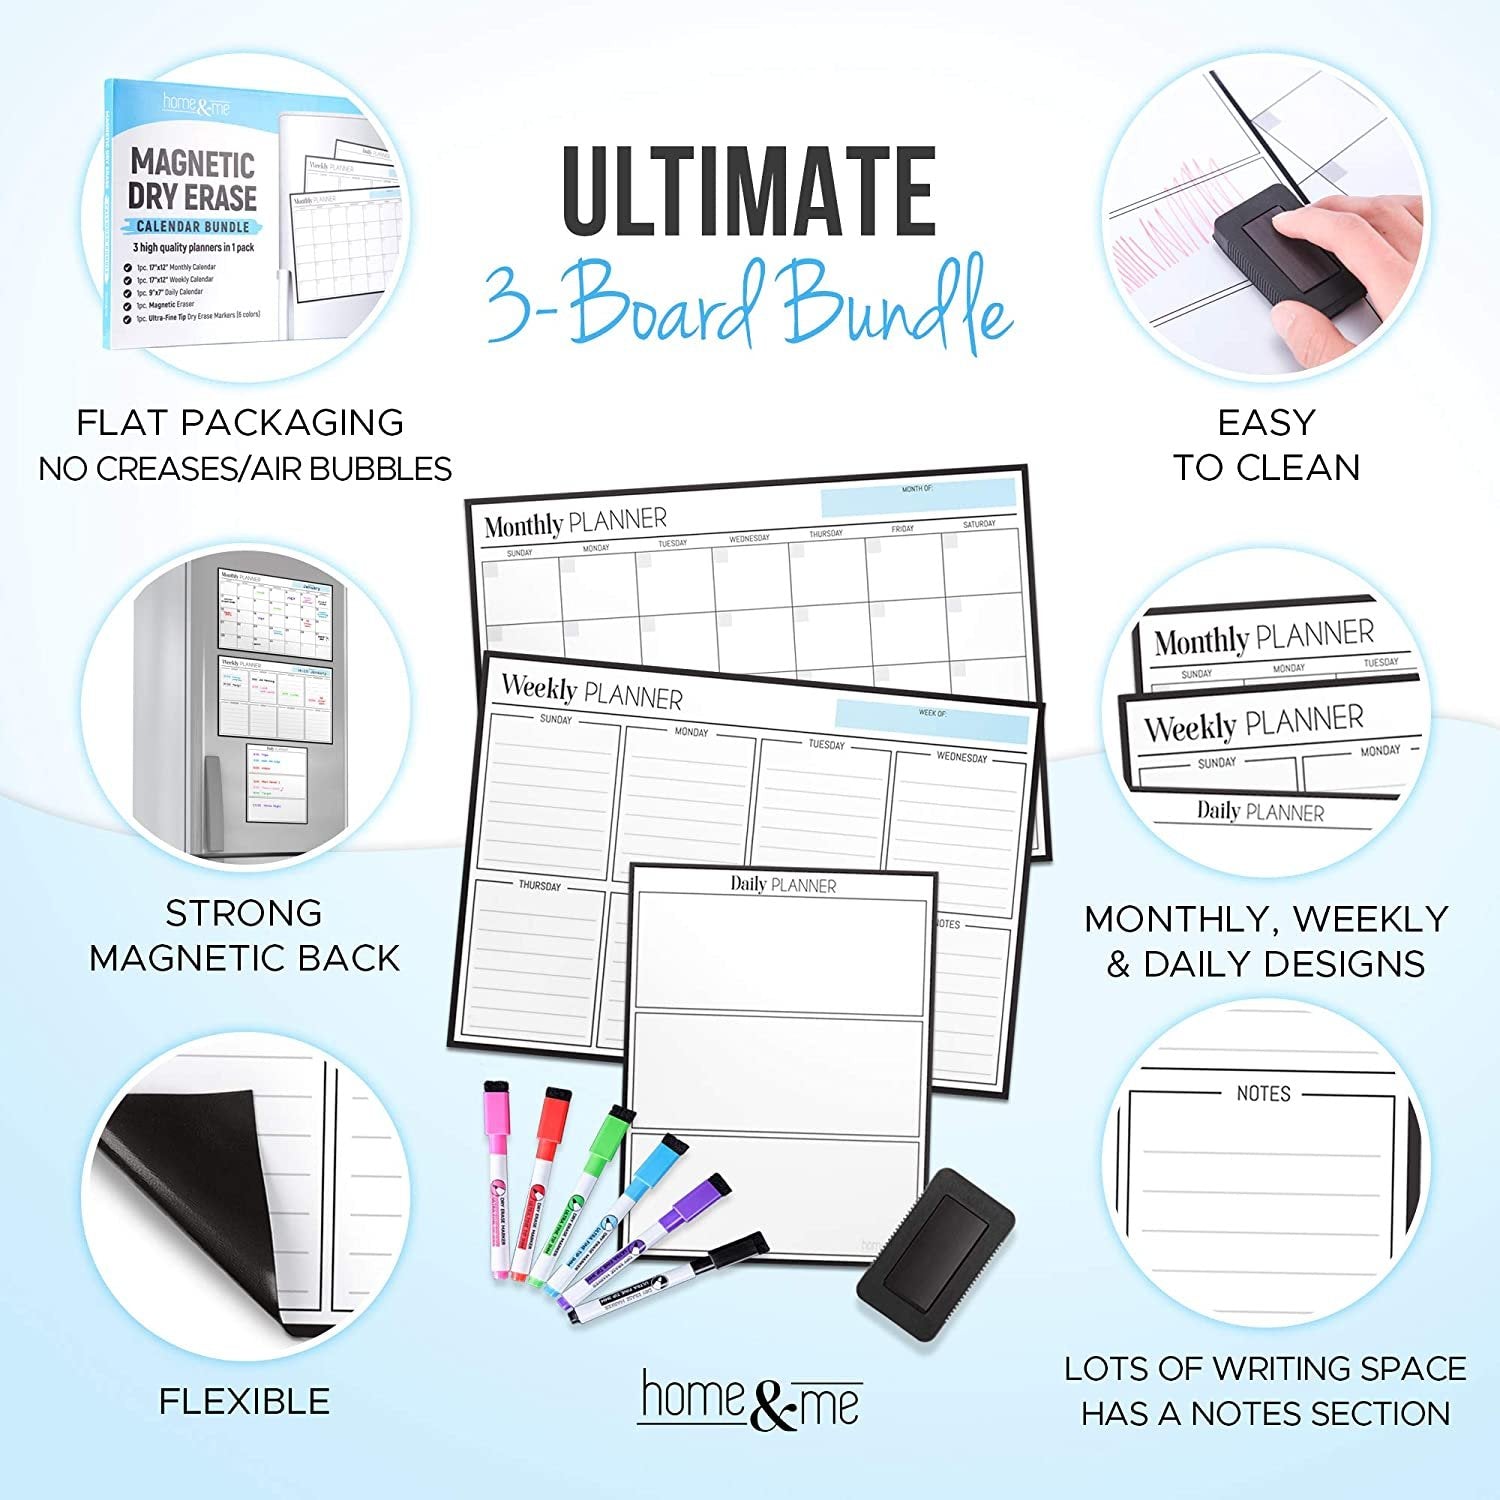 Magnetic Calendar Bundle: 3 Boards Included 17"x12" - Monthly, Weekly, Daily - Fridge Calendar Dry Erase Magnetic - Calendar Whiteboard - 6 Fine Tip Markers, Large Eraser, Magnets, Fridge Whiteboard